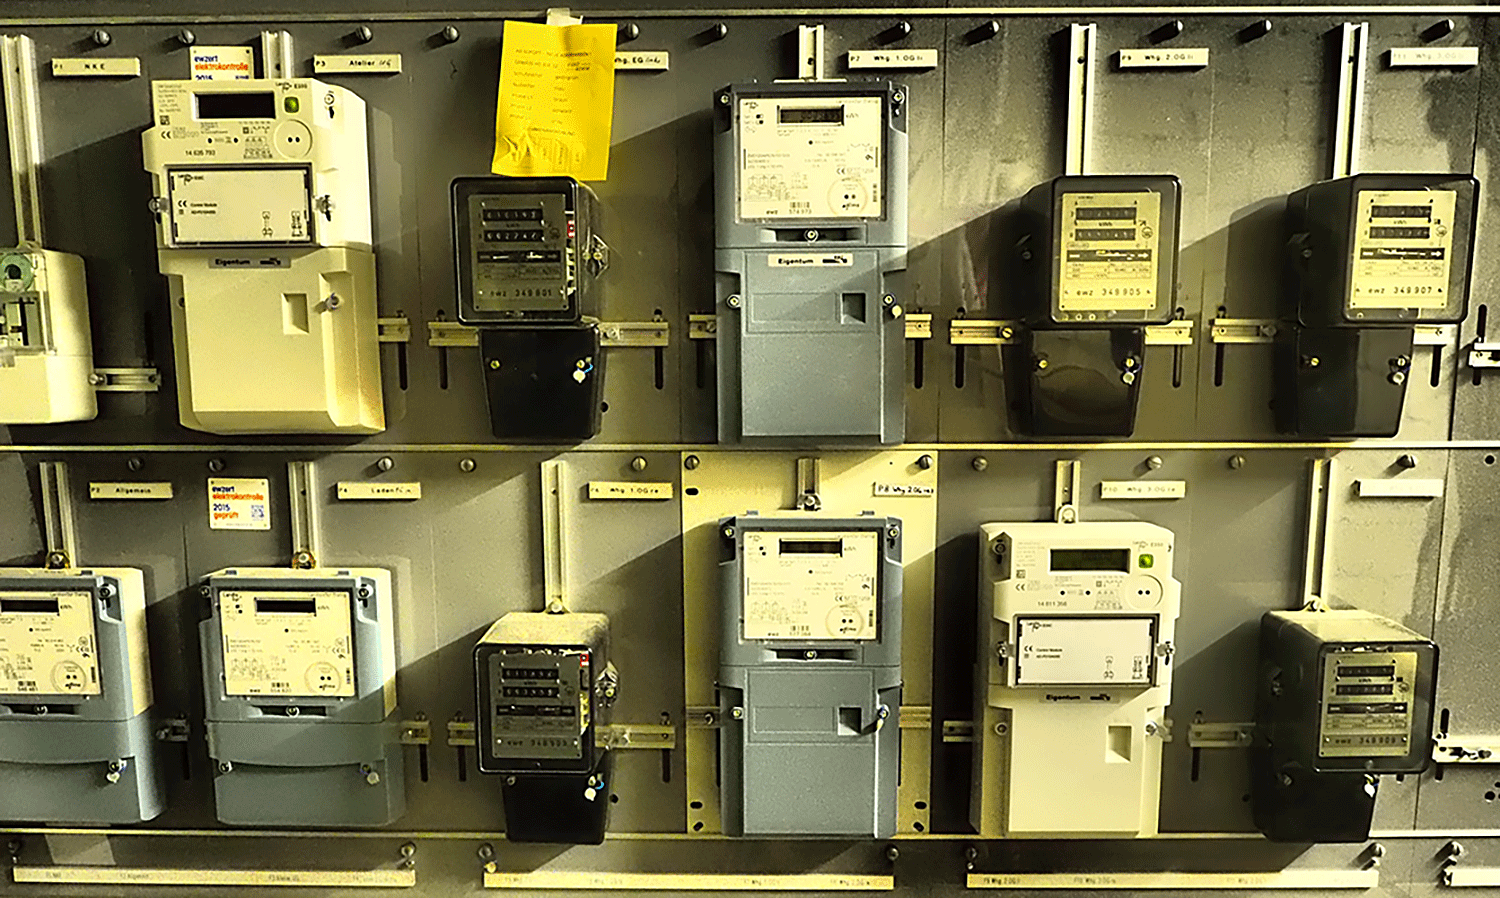 “Counting Exactitude”: This picture of electricity meters was taken by Jonas Schädler from the Department of History of UZH. The jury’s comments: “You might ask, is that really research? Investigating old electricity meters? But on second glance this image reflects an evolution of the technology. And not only that: It’s about history and culture. It thus relates to every inhabitant. It’s a sort of tinkering with evolution, a merging of past and future.”